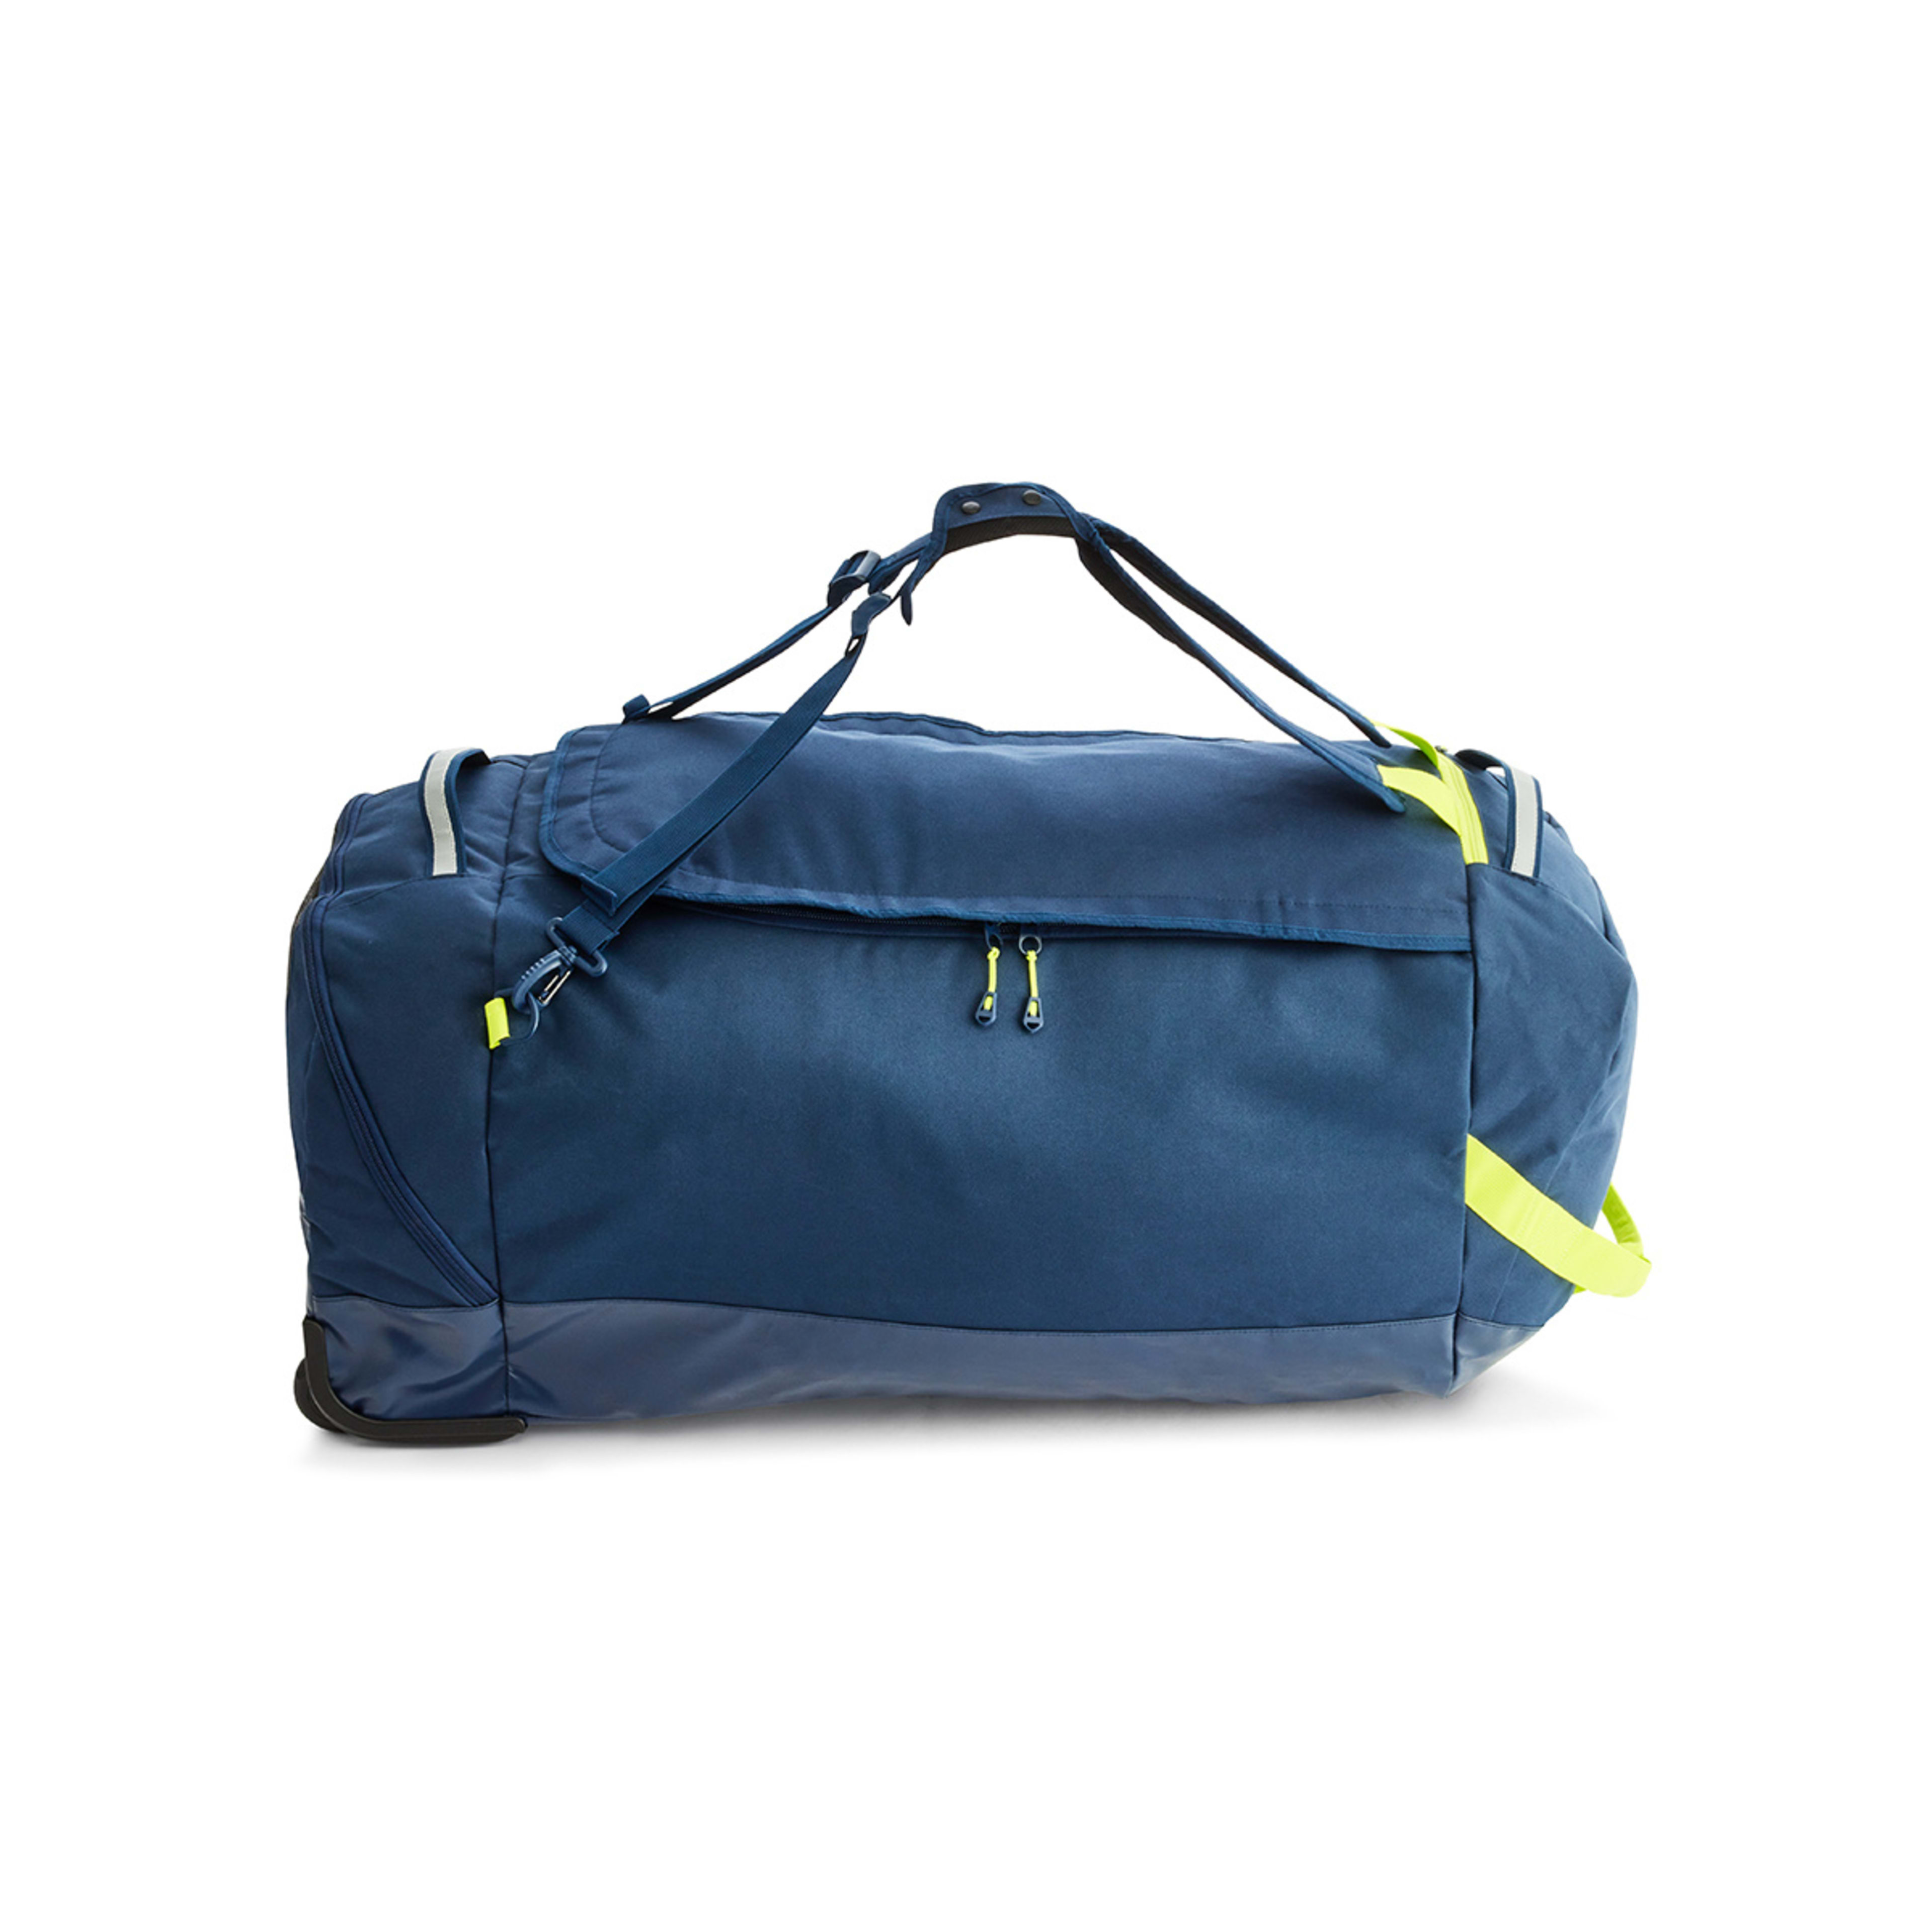 Roll Up Wheeled Travel Duffle - Navy - Kmart